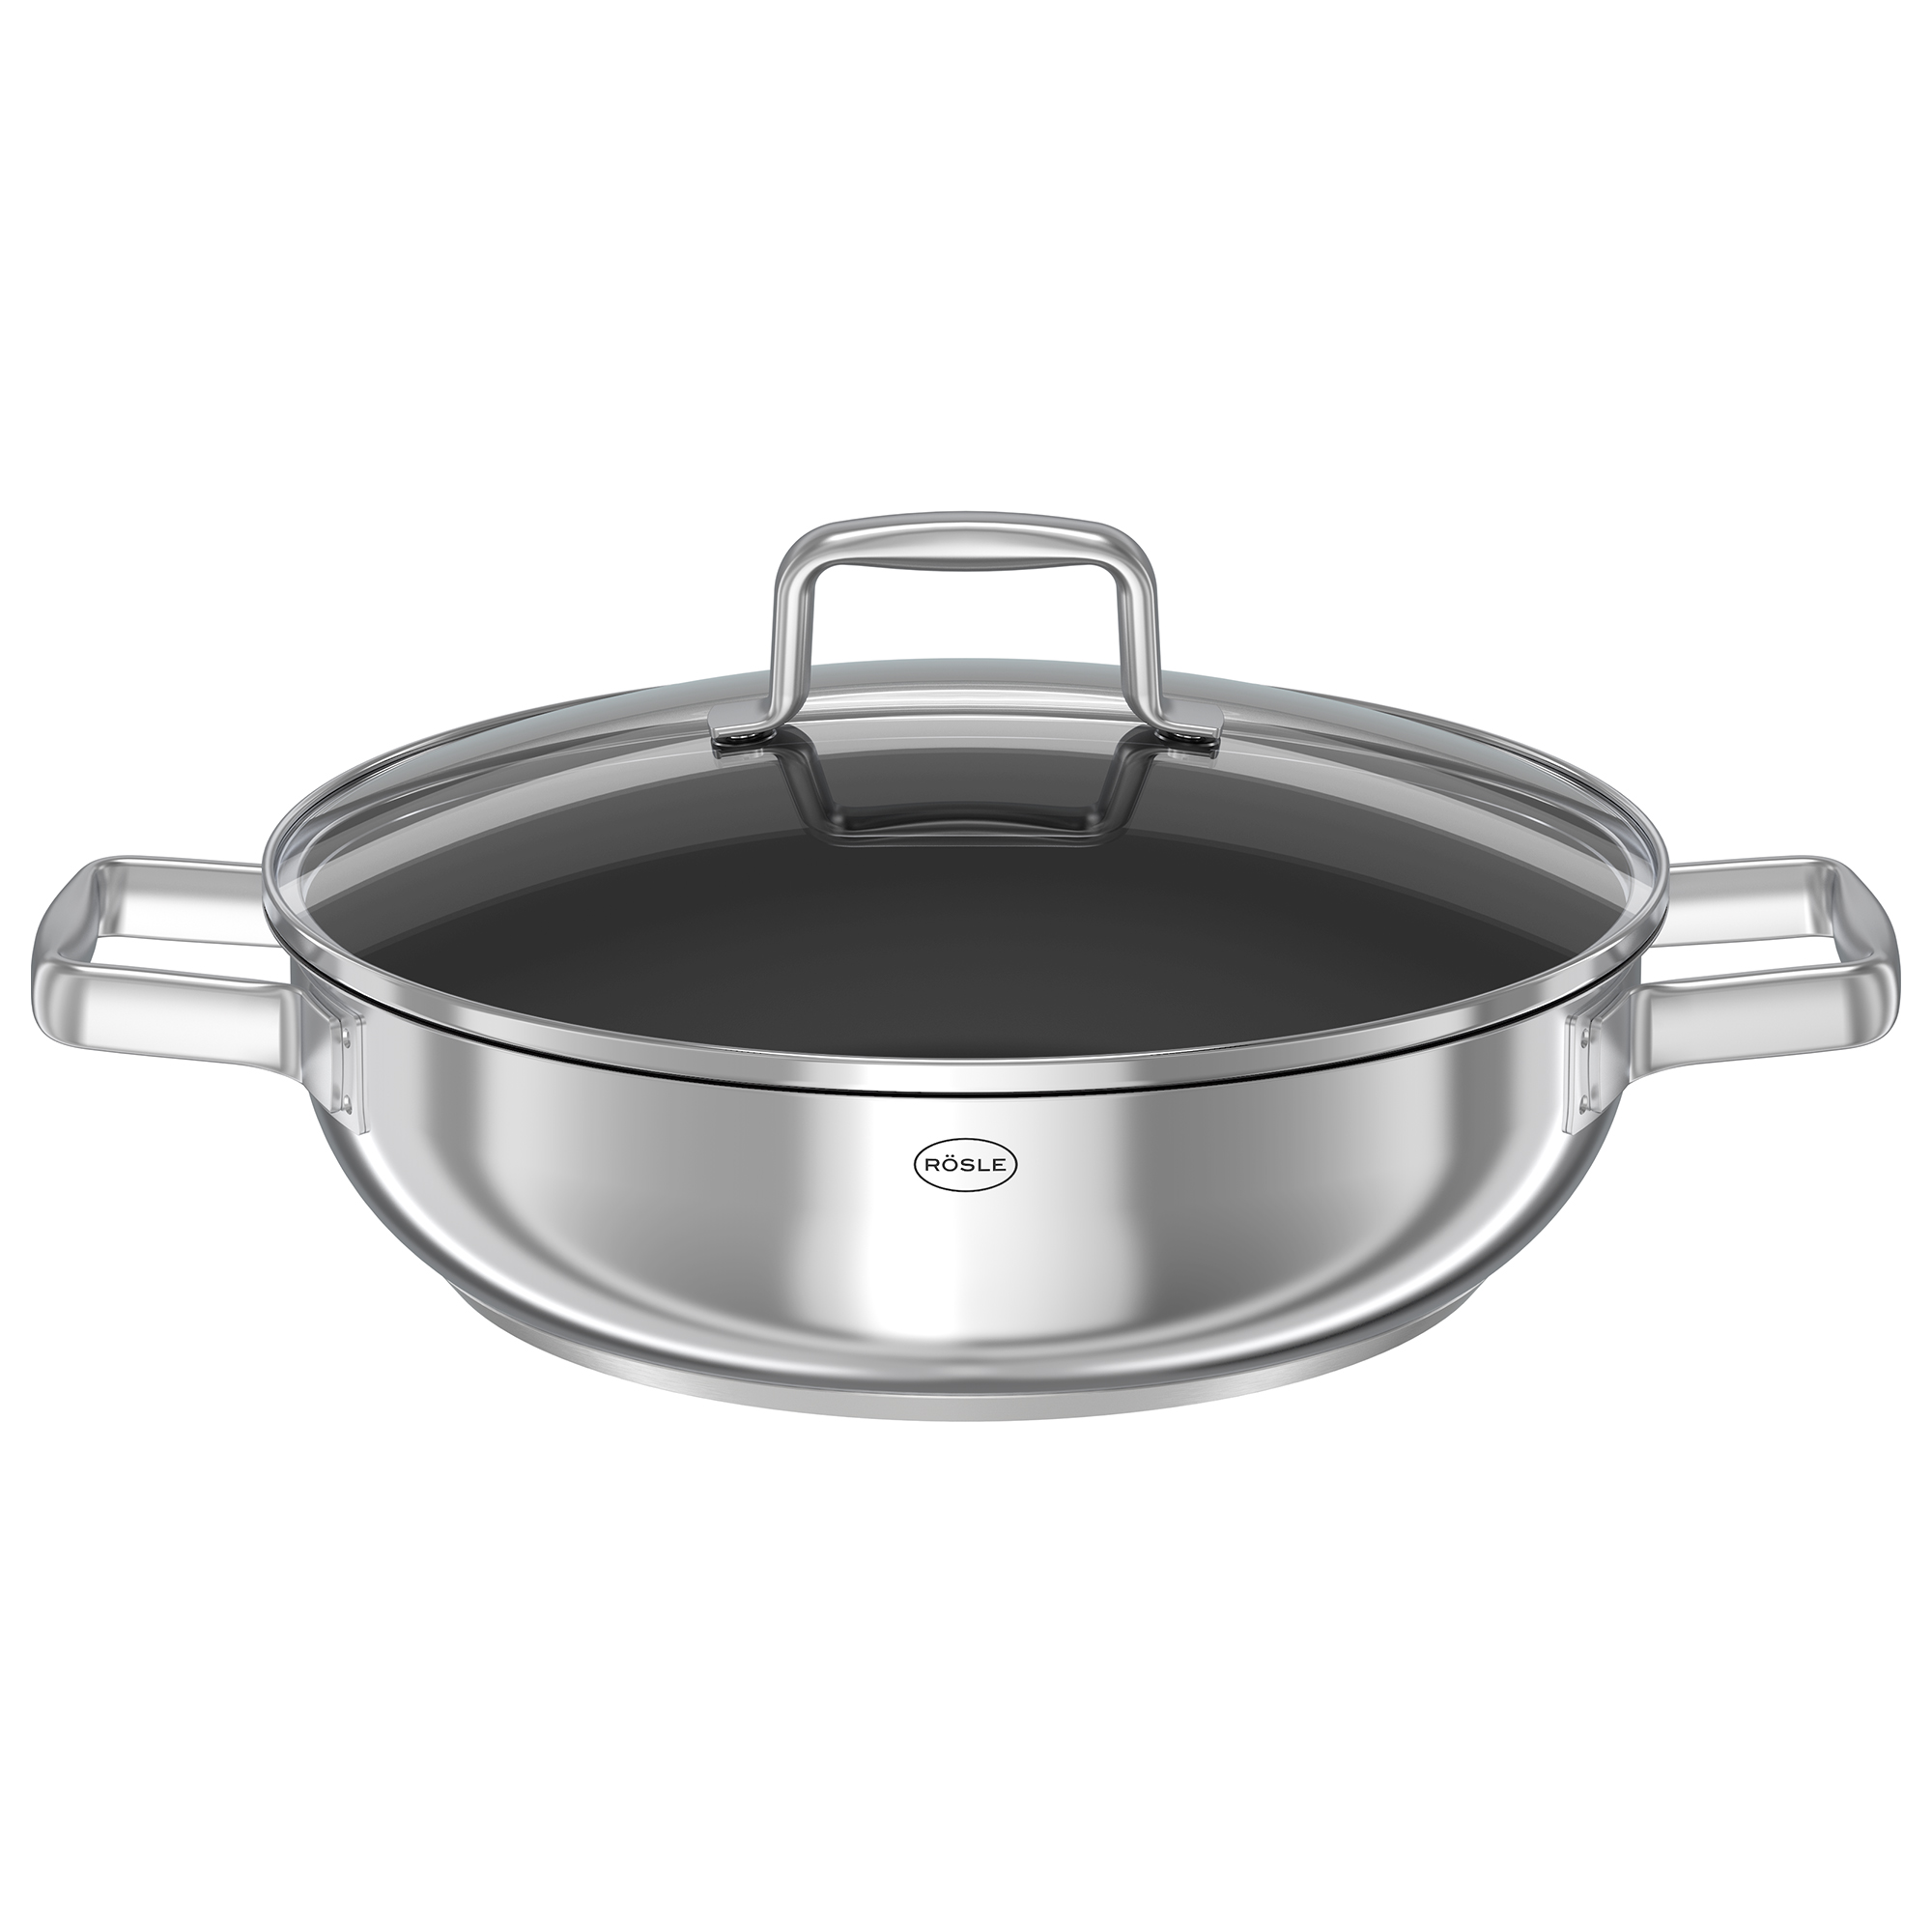 Serving Pan MOMENTS Ø 28 cm|11.0 in. PTFE ProPlex